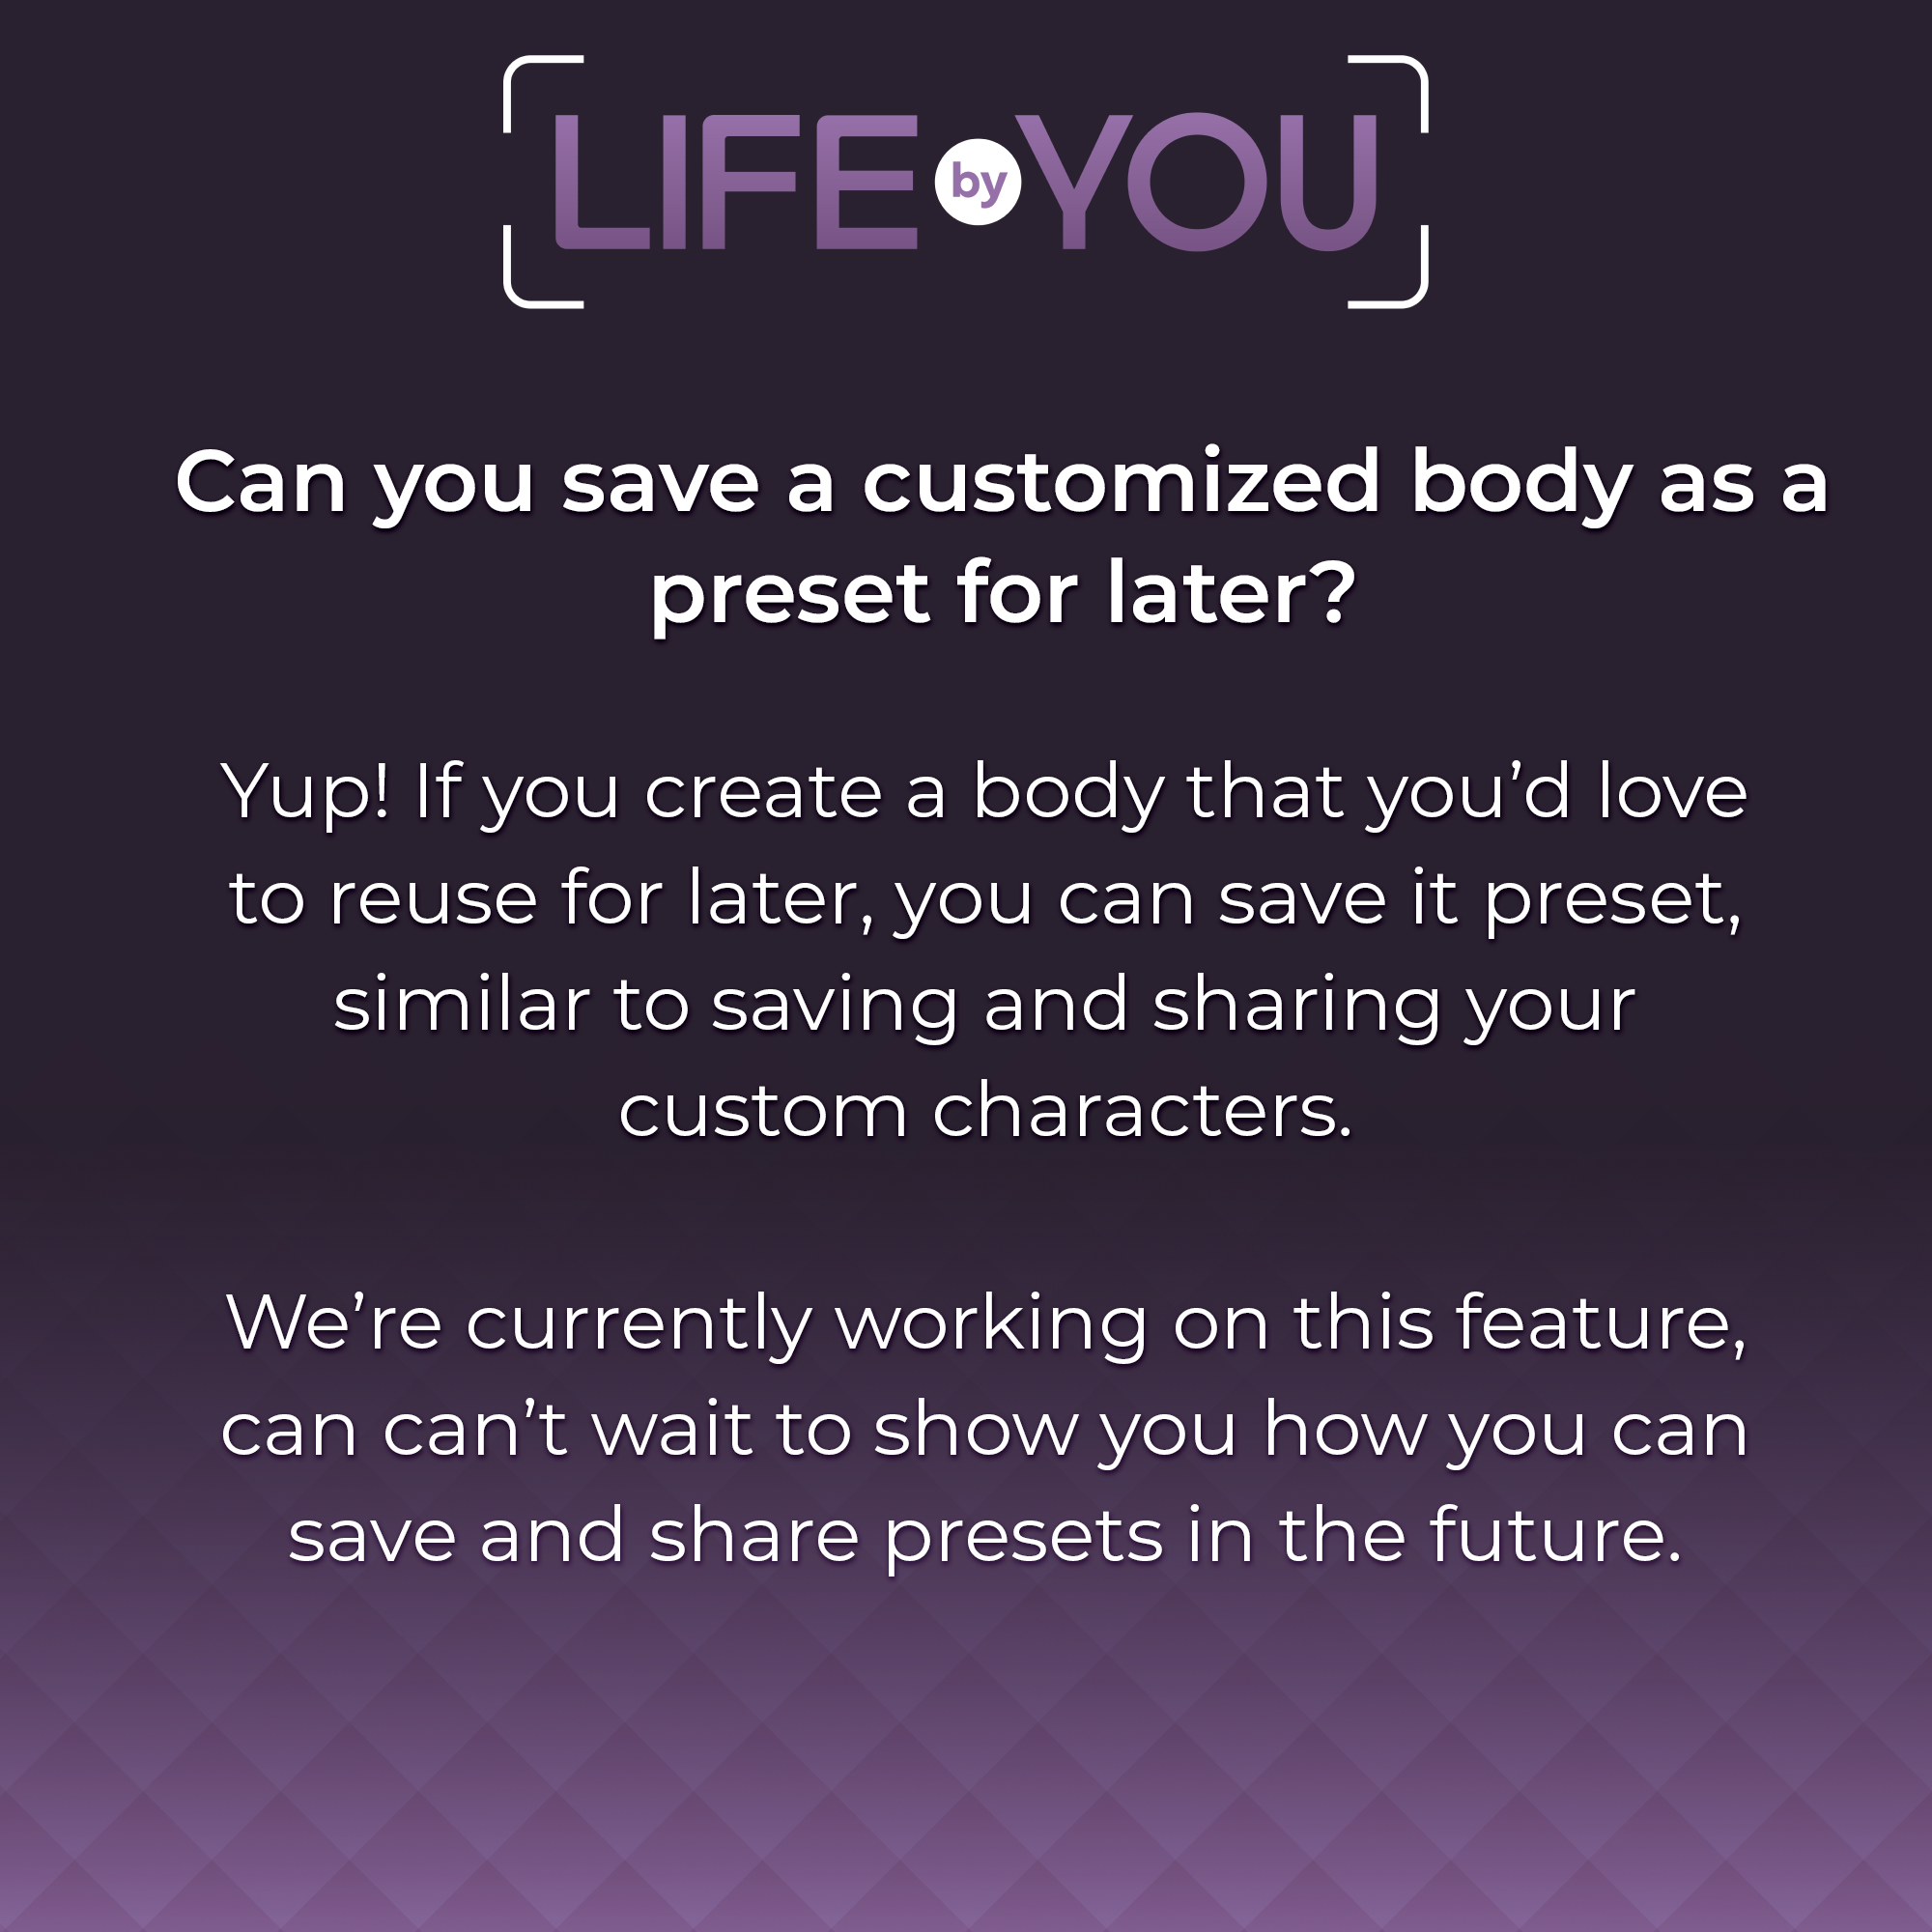 QnA Can you save a body as a preset for later?